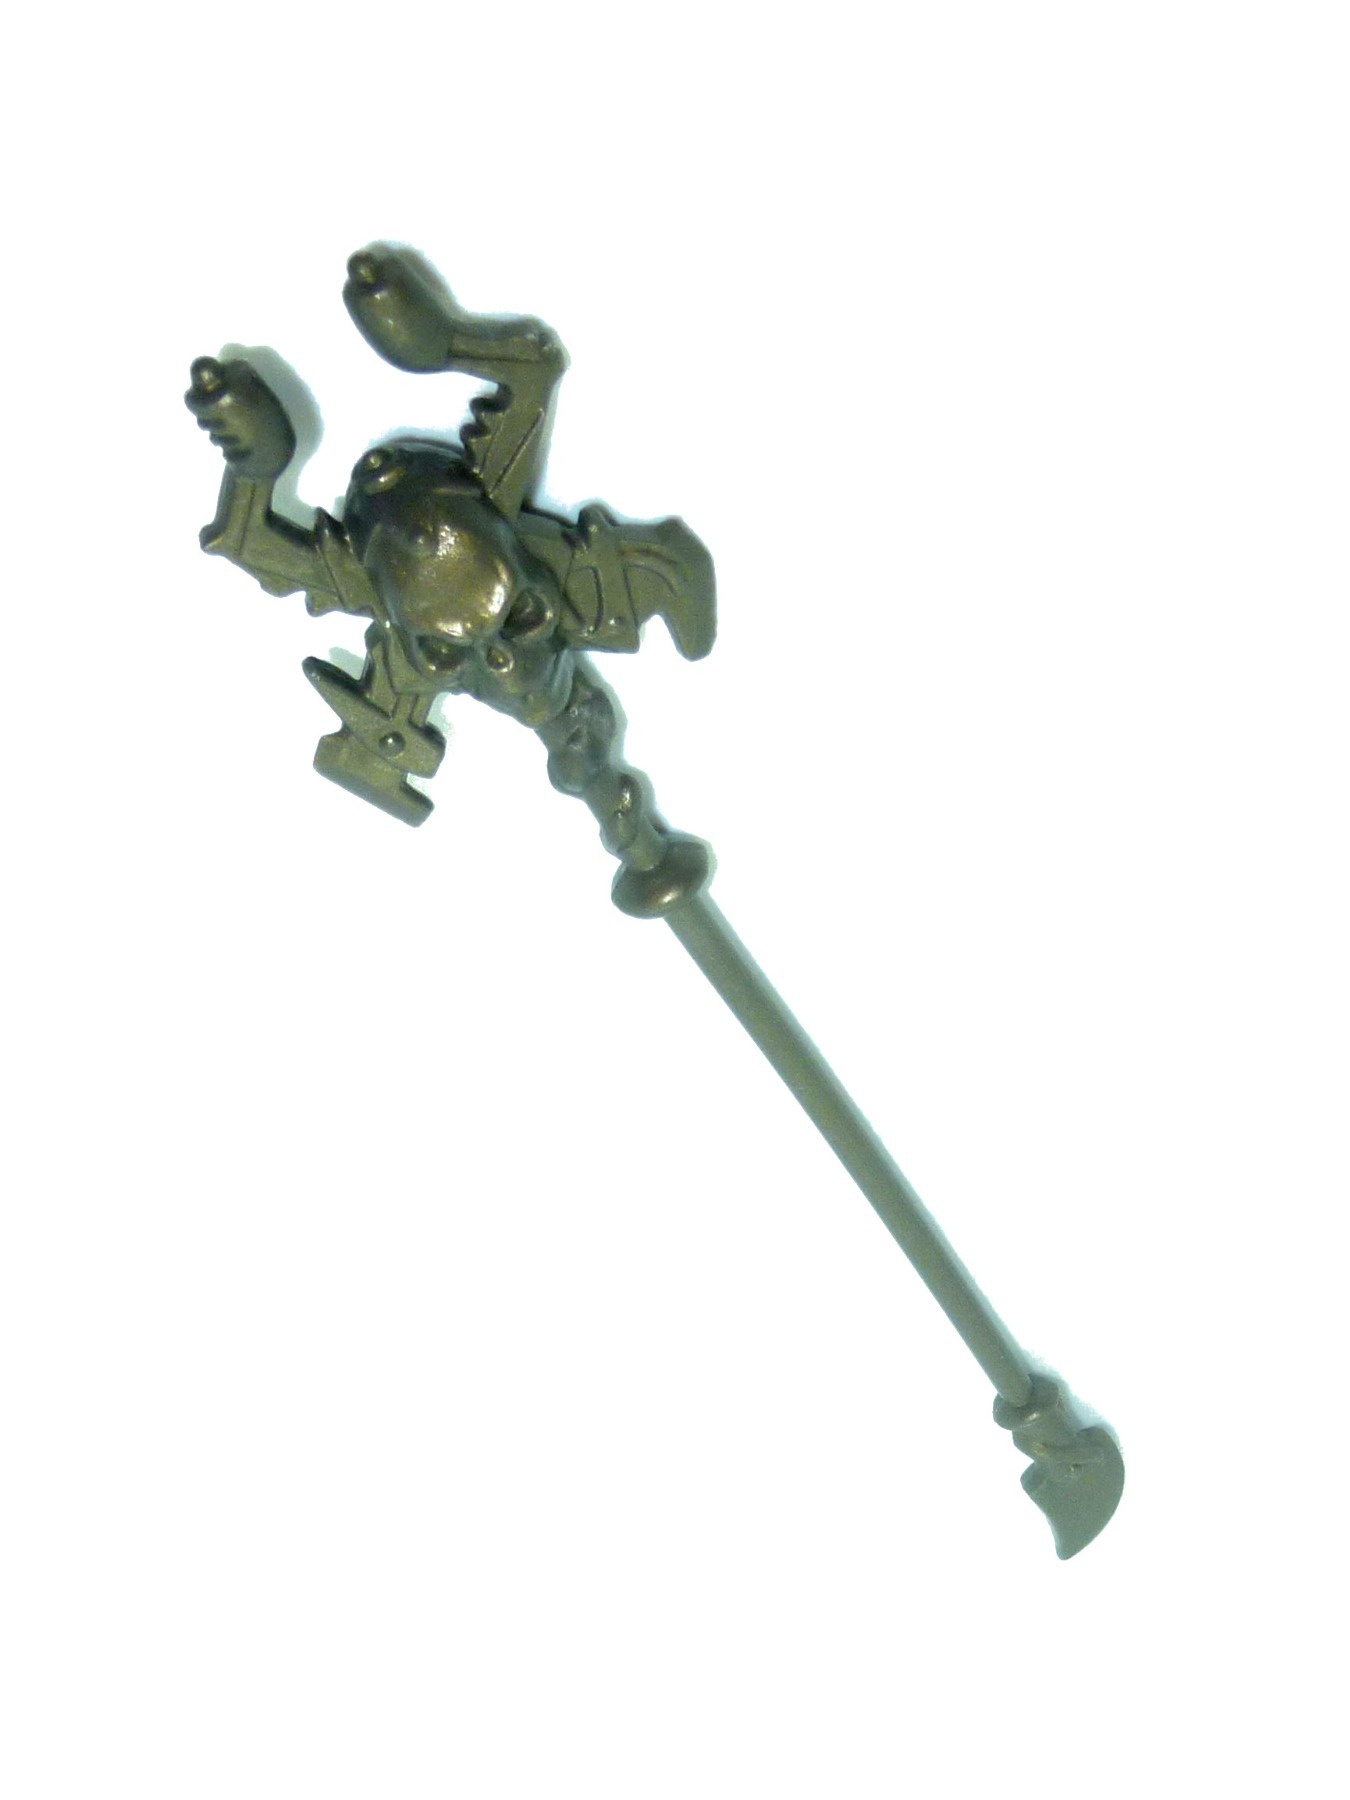 Skeletor Wand / Weapon Accessory 2